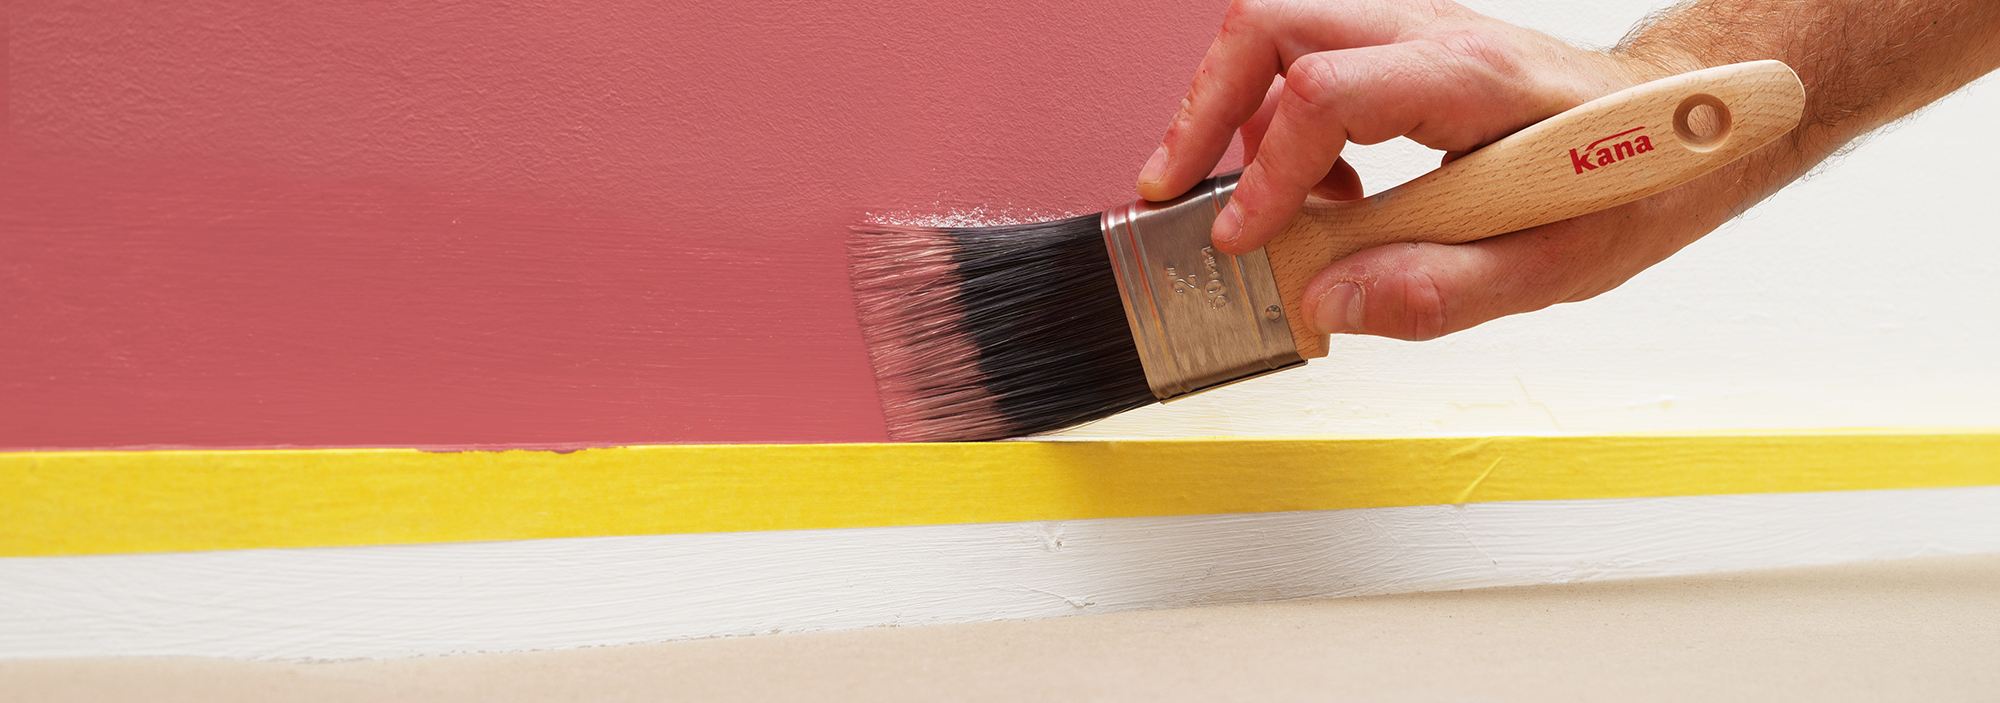 Kana paint brush is used to paint a smooth line on the wall above skirting board.